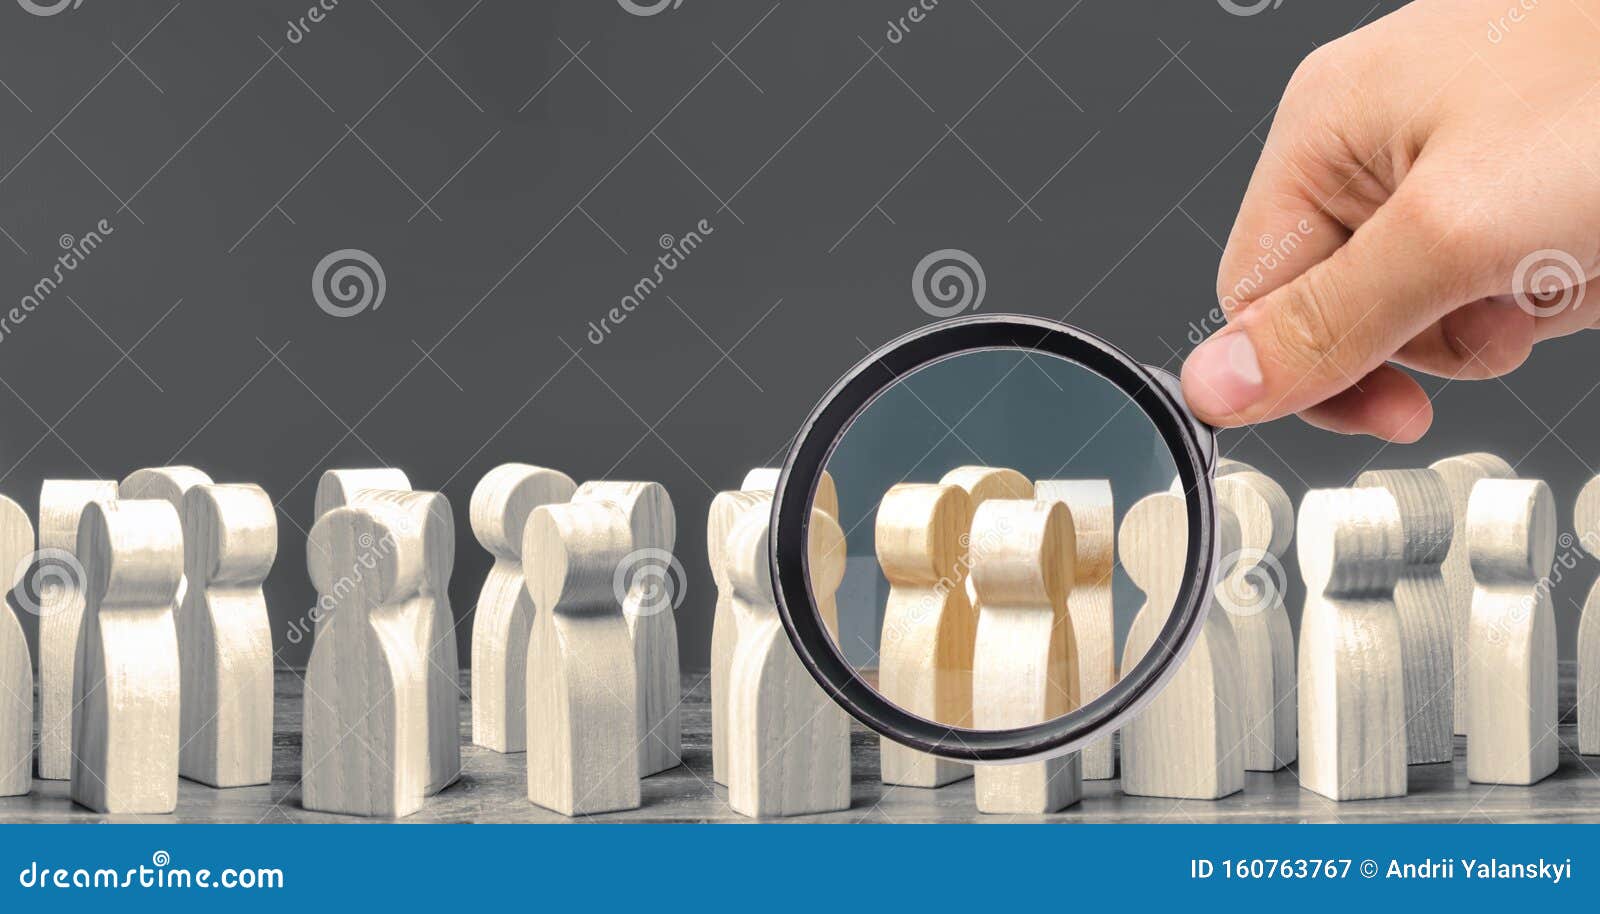 a magnifying glass looks at a crowd of wooden figures of people. society, demographic. group of citizens, rally, political